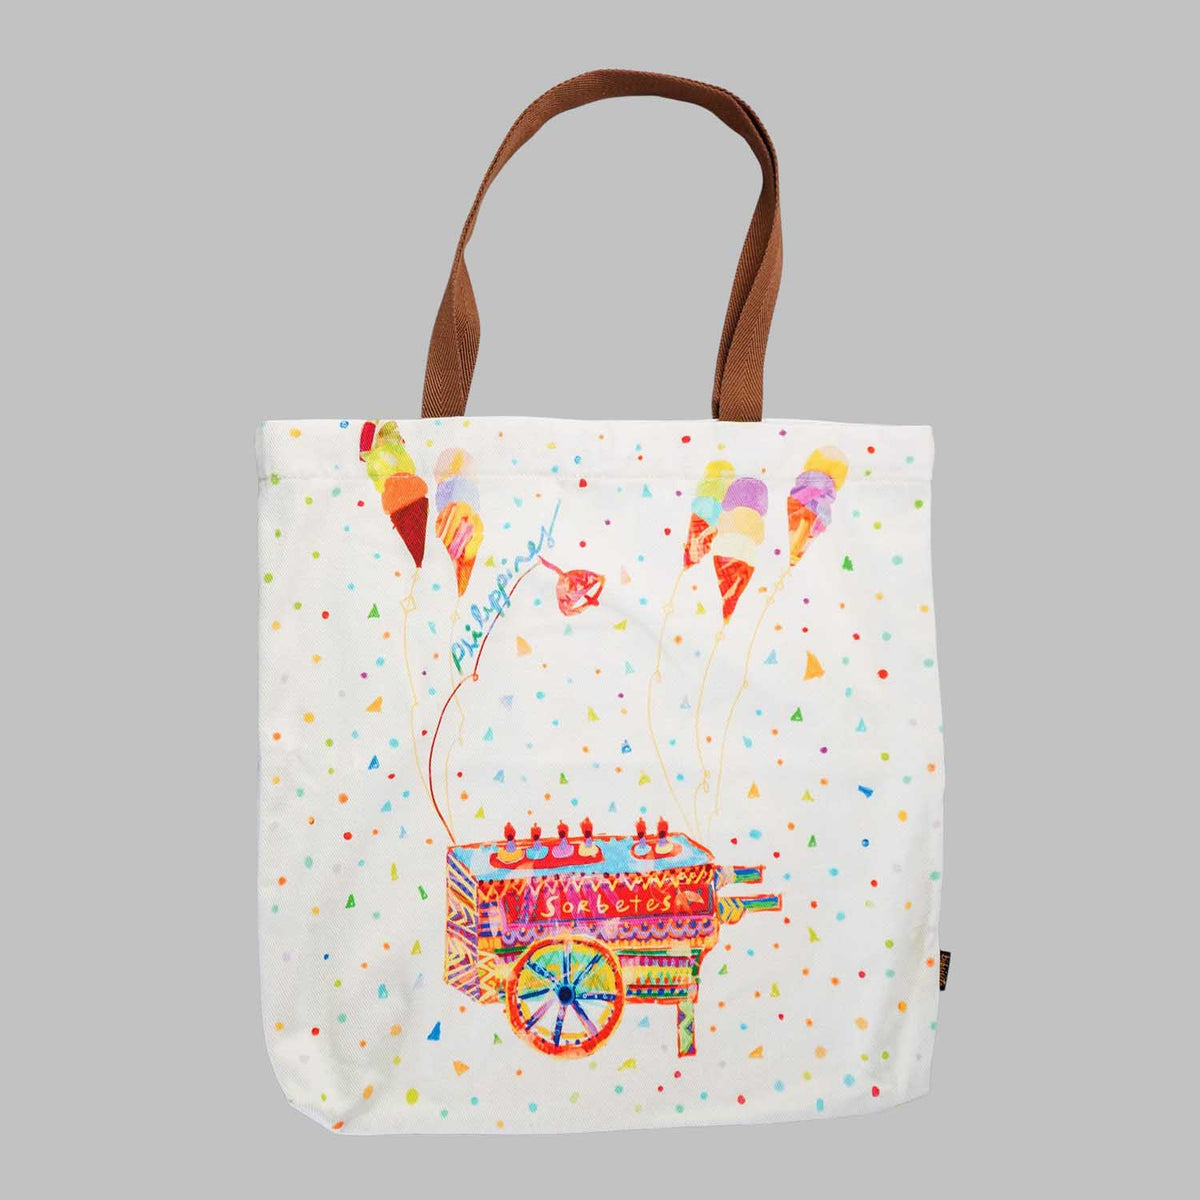 Kultura Tote Bag Special Canvas with Sorbetes Print - White